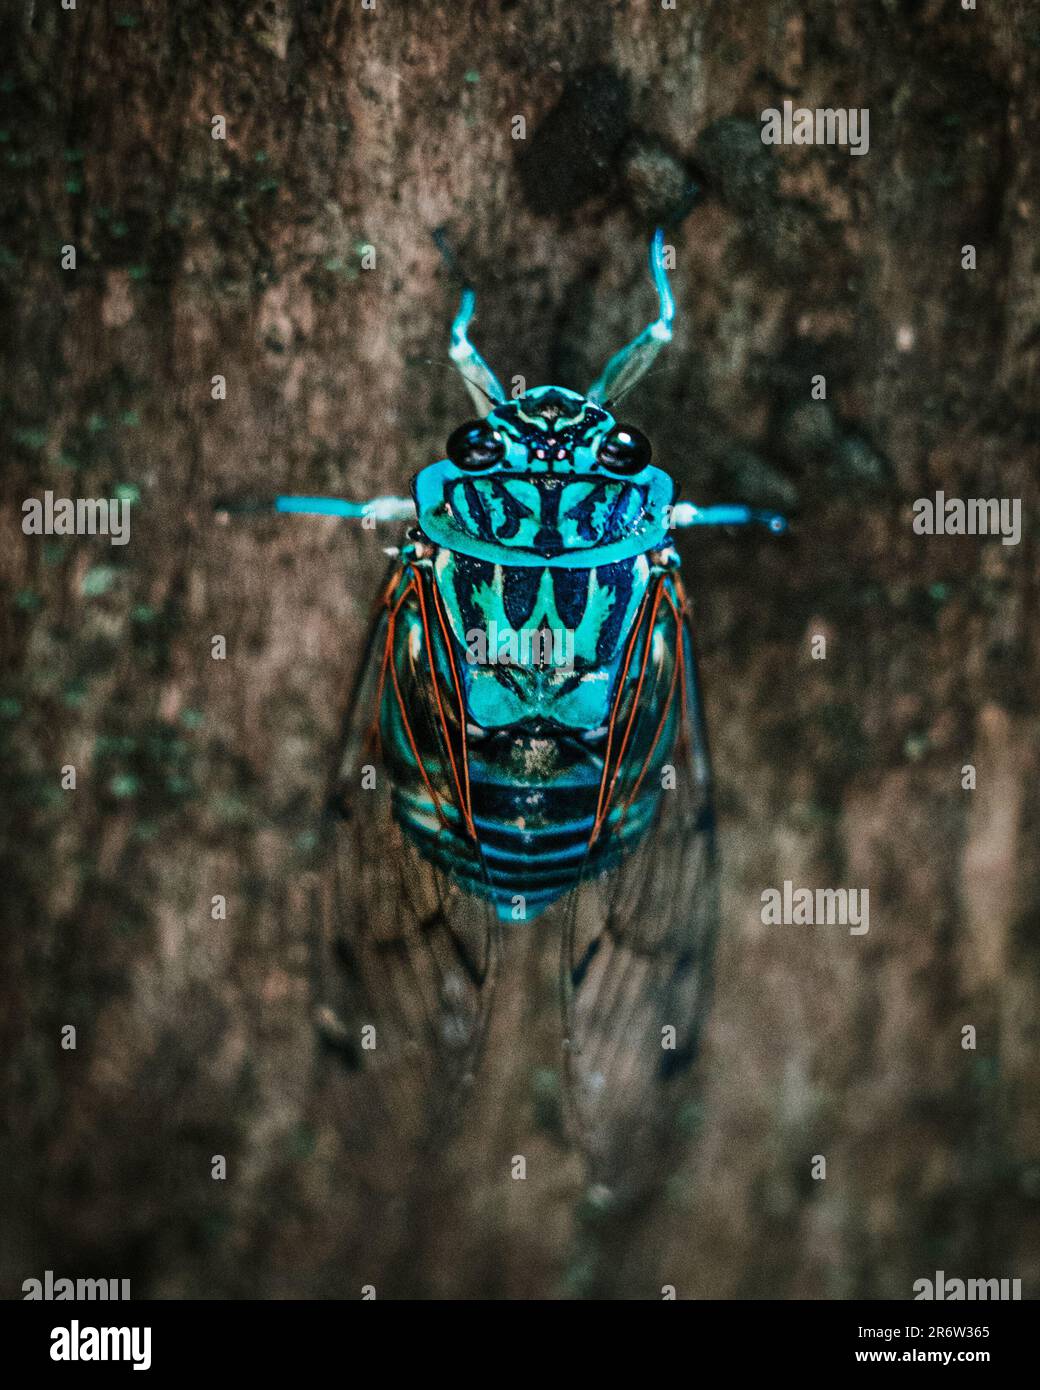 Blue beetle bug perched on a tree: Nature's tiny jewel adorned with vibrant hues, blending harmoniously with its arboreal habitat in a captivating dis Stock Photo